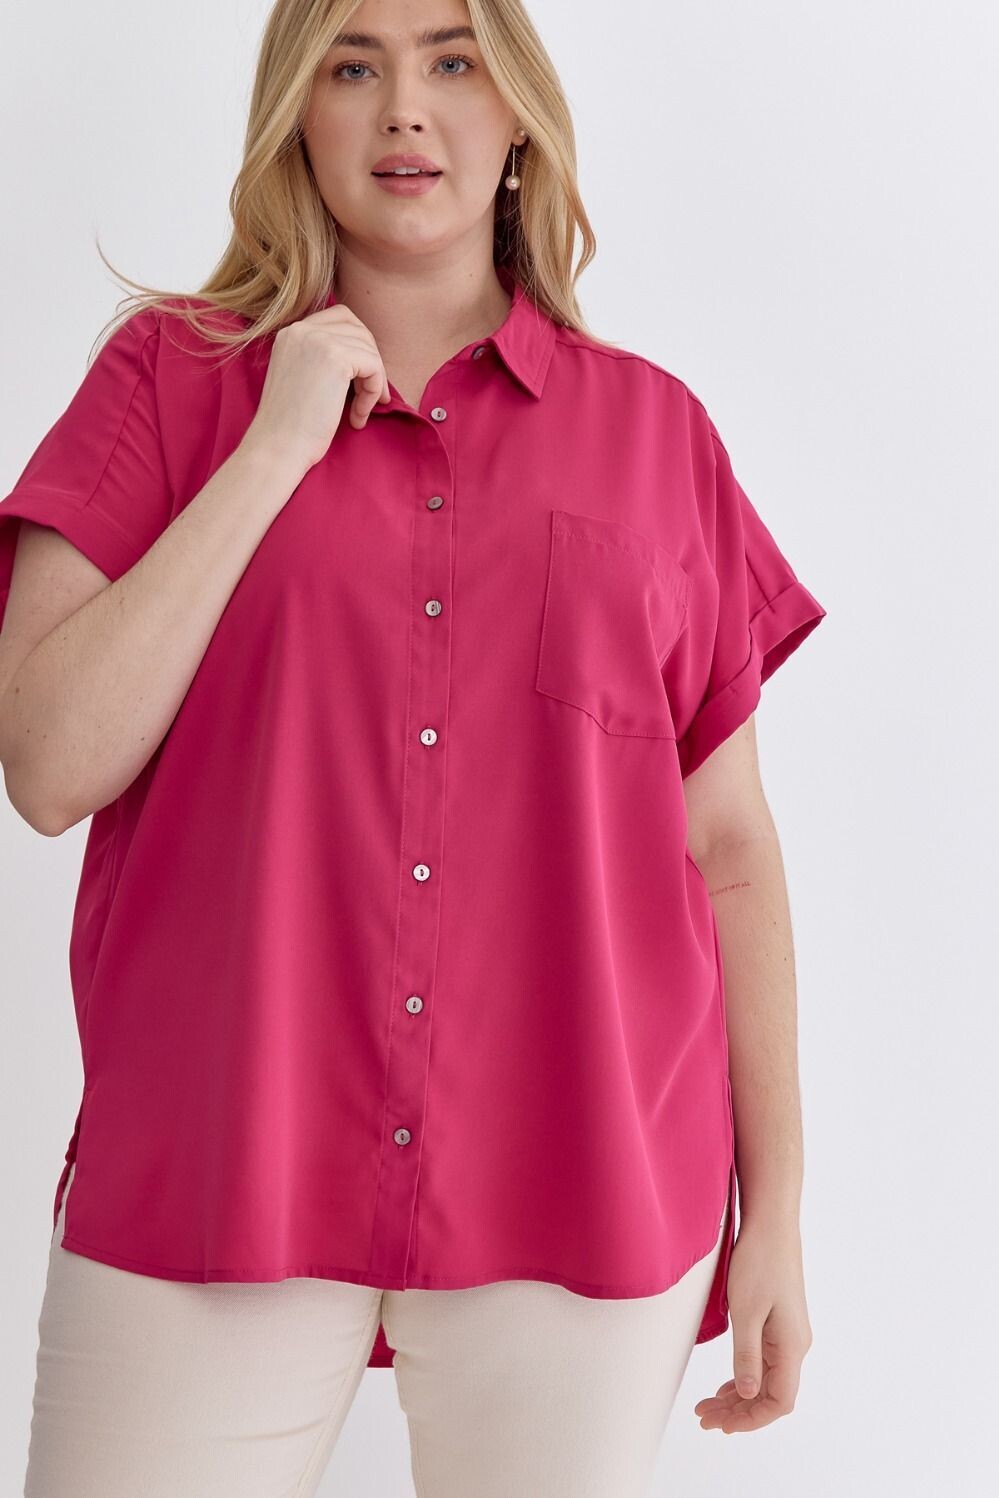 Oh So Classic Top, CURVY